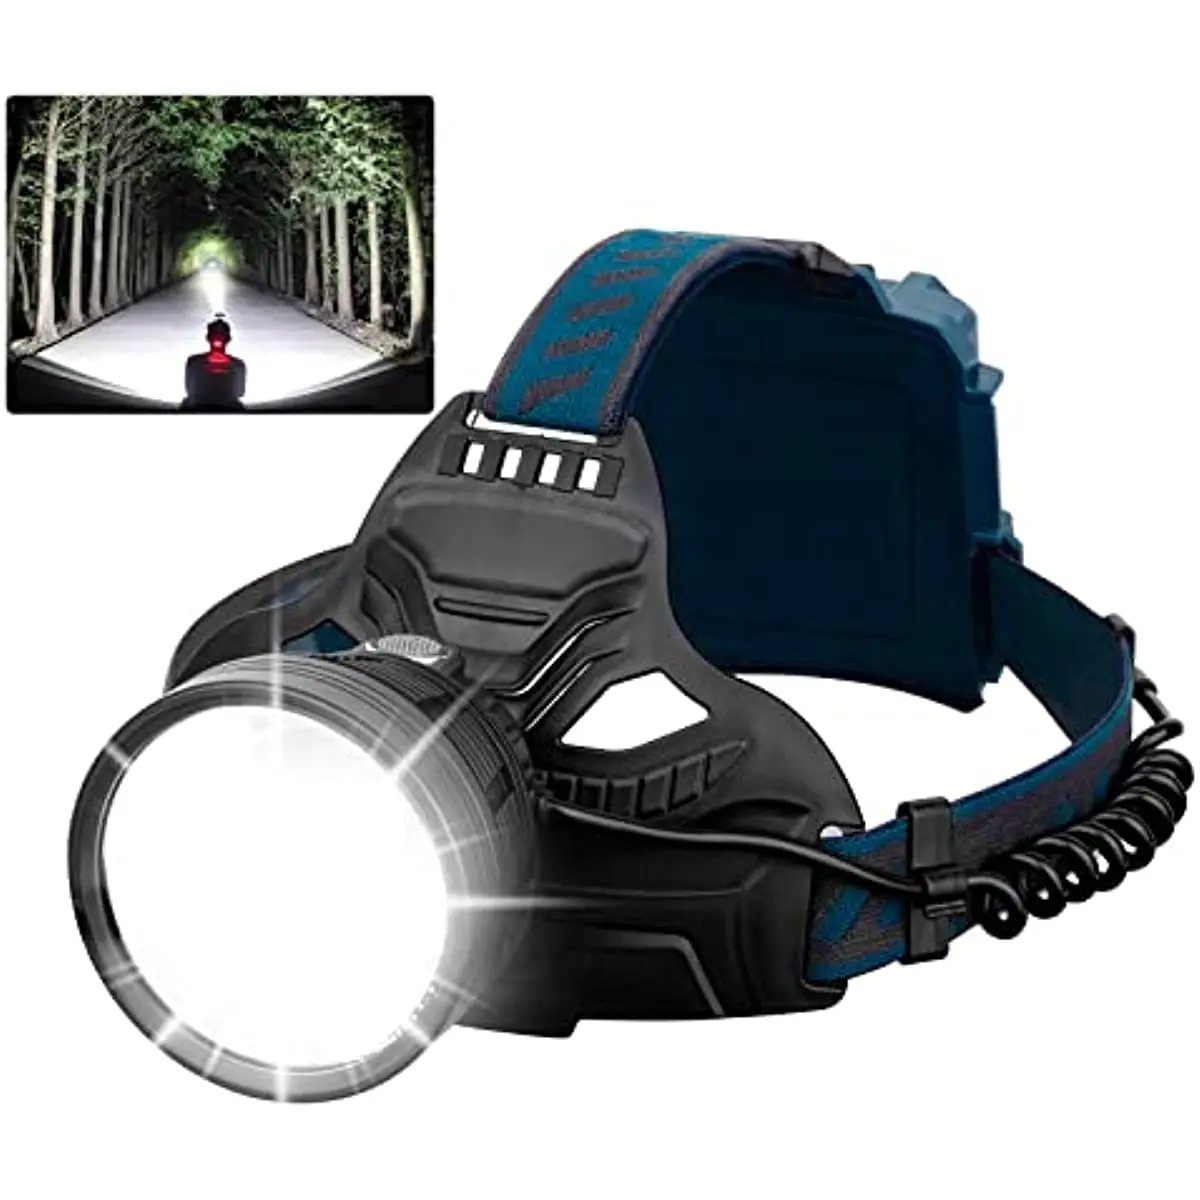 New LED Rechargeable Headlamps for Adults, 90000 Lumen Super Bright Headlamp Flashlight 90°Adjustable 4 Modes IPX5 Waterproof